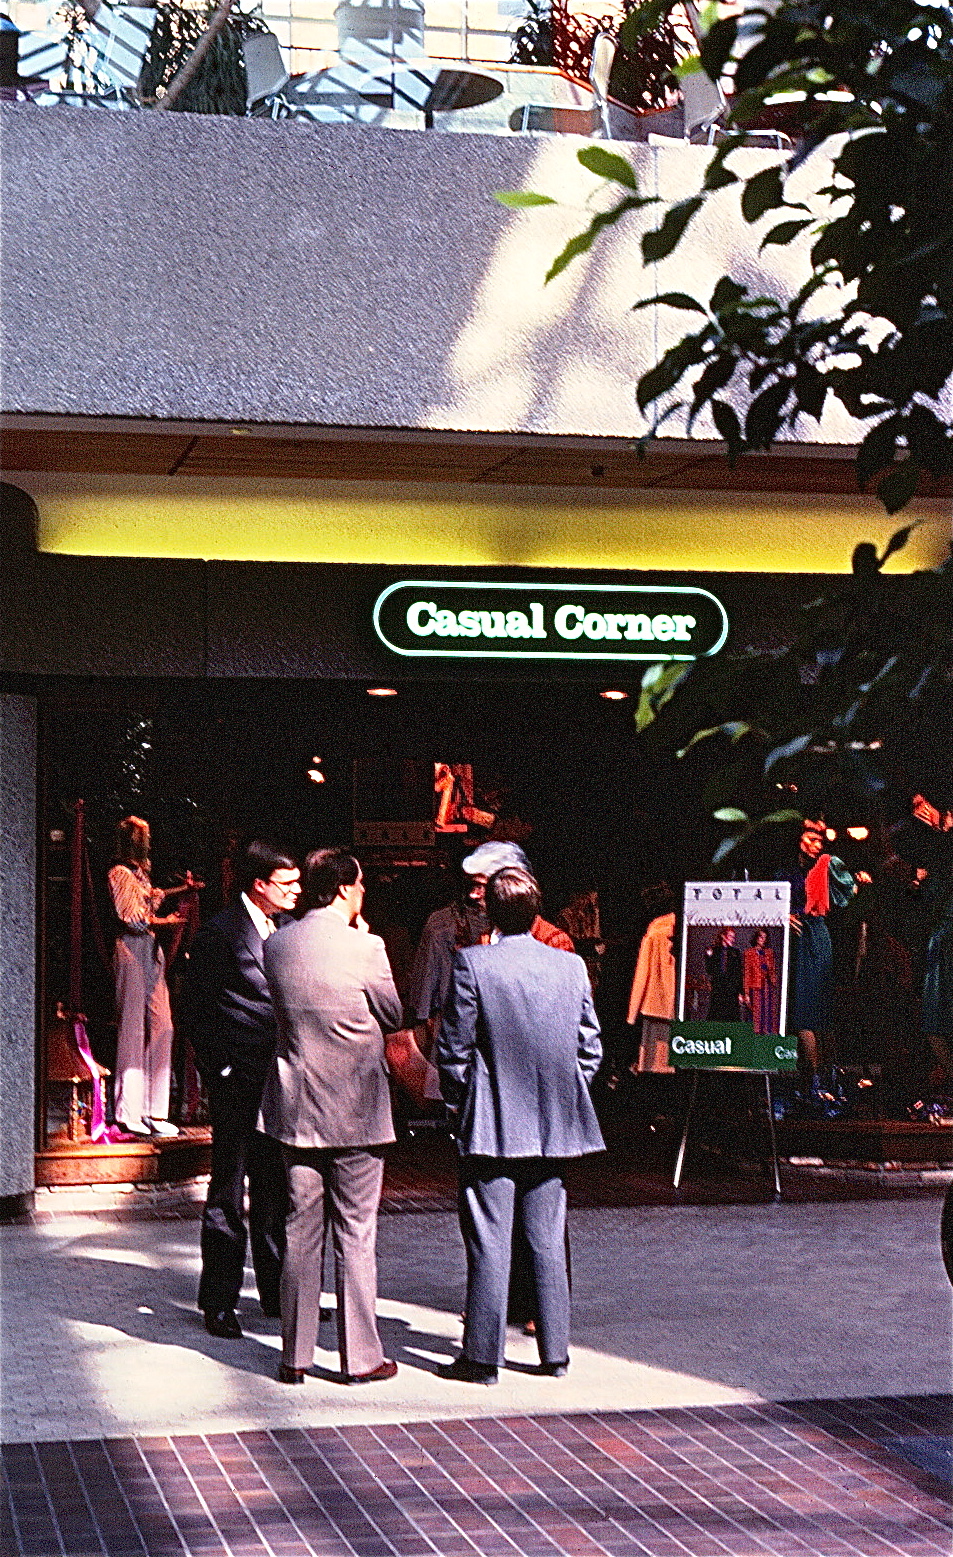 Canopy over an entrance featuring a retail sign standard saying Casual Corner.